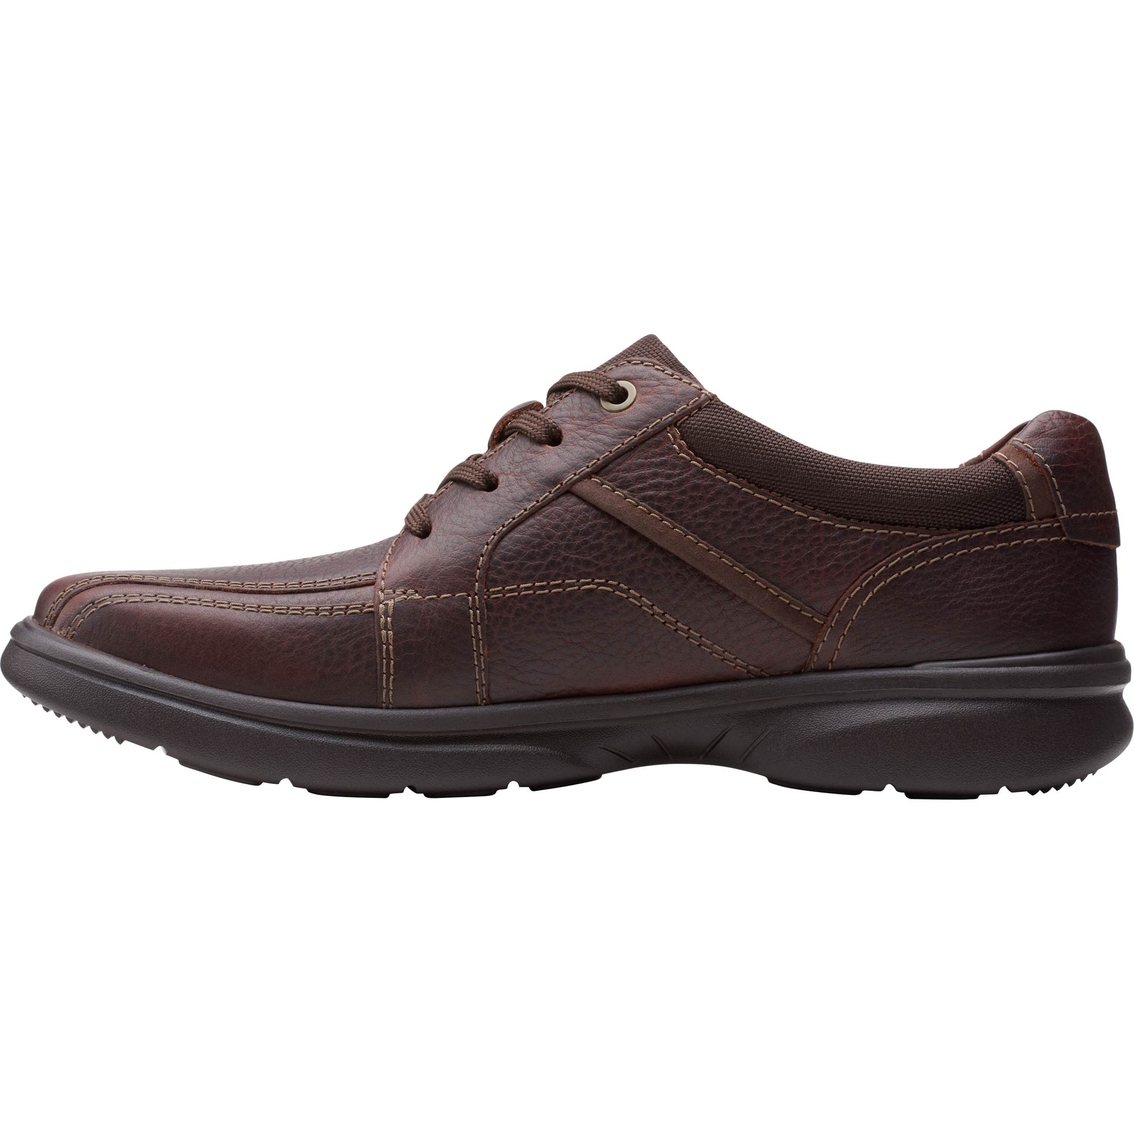 Clarks Bradley Walking Shoes | Casuals | Shoes | Shop The Exchange